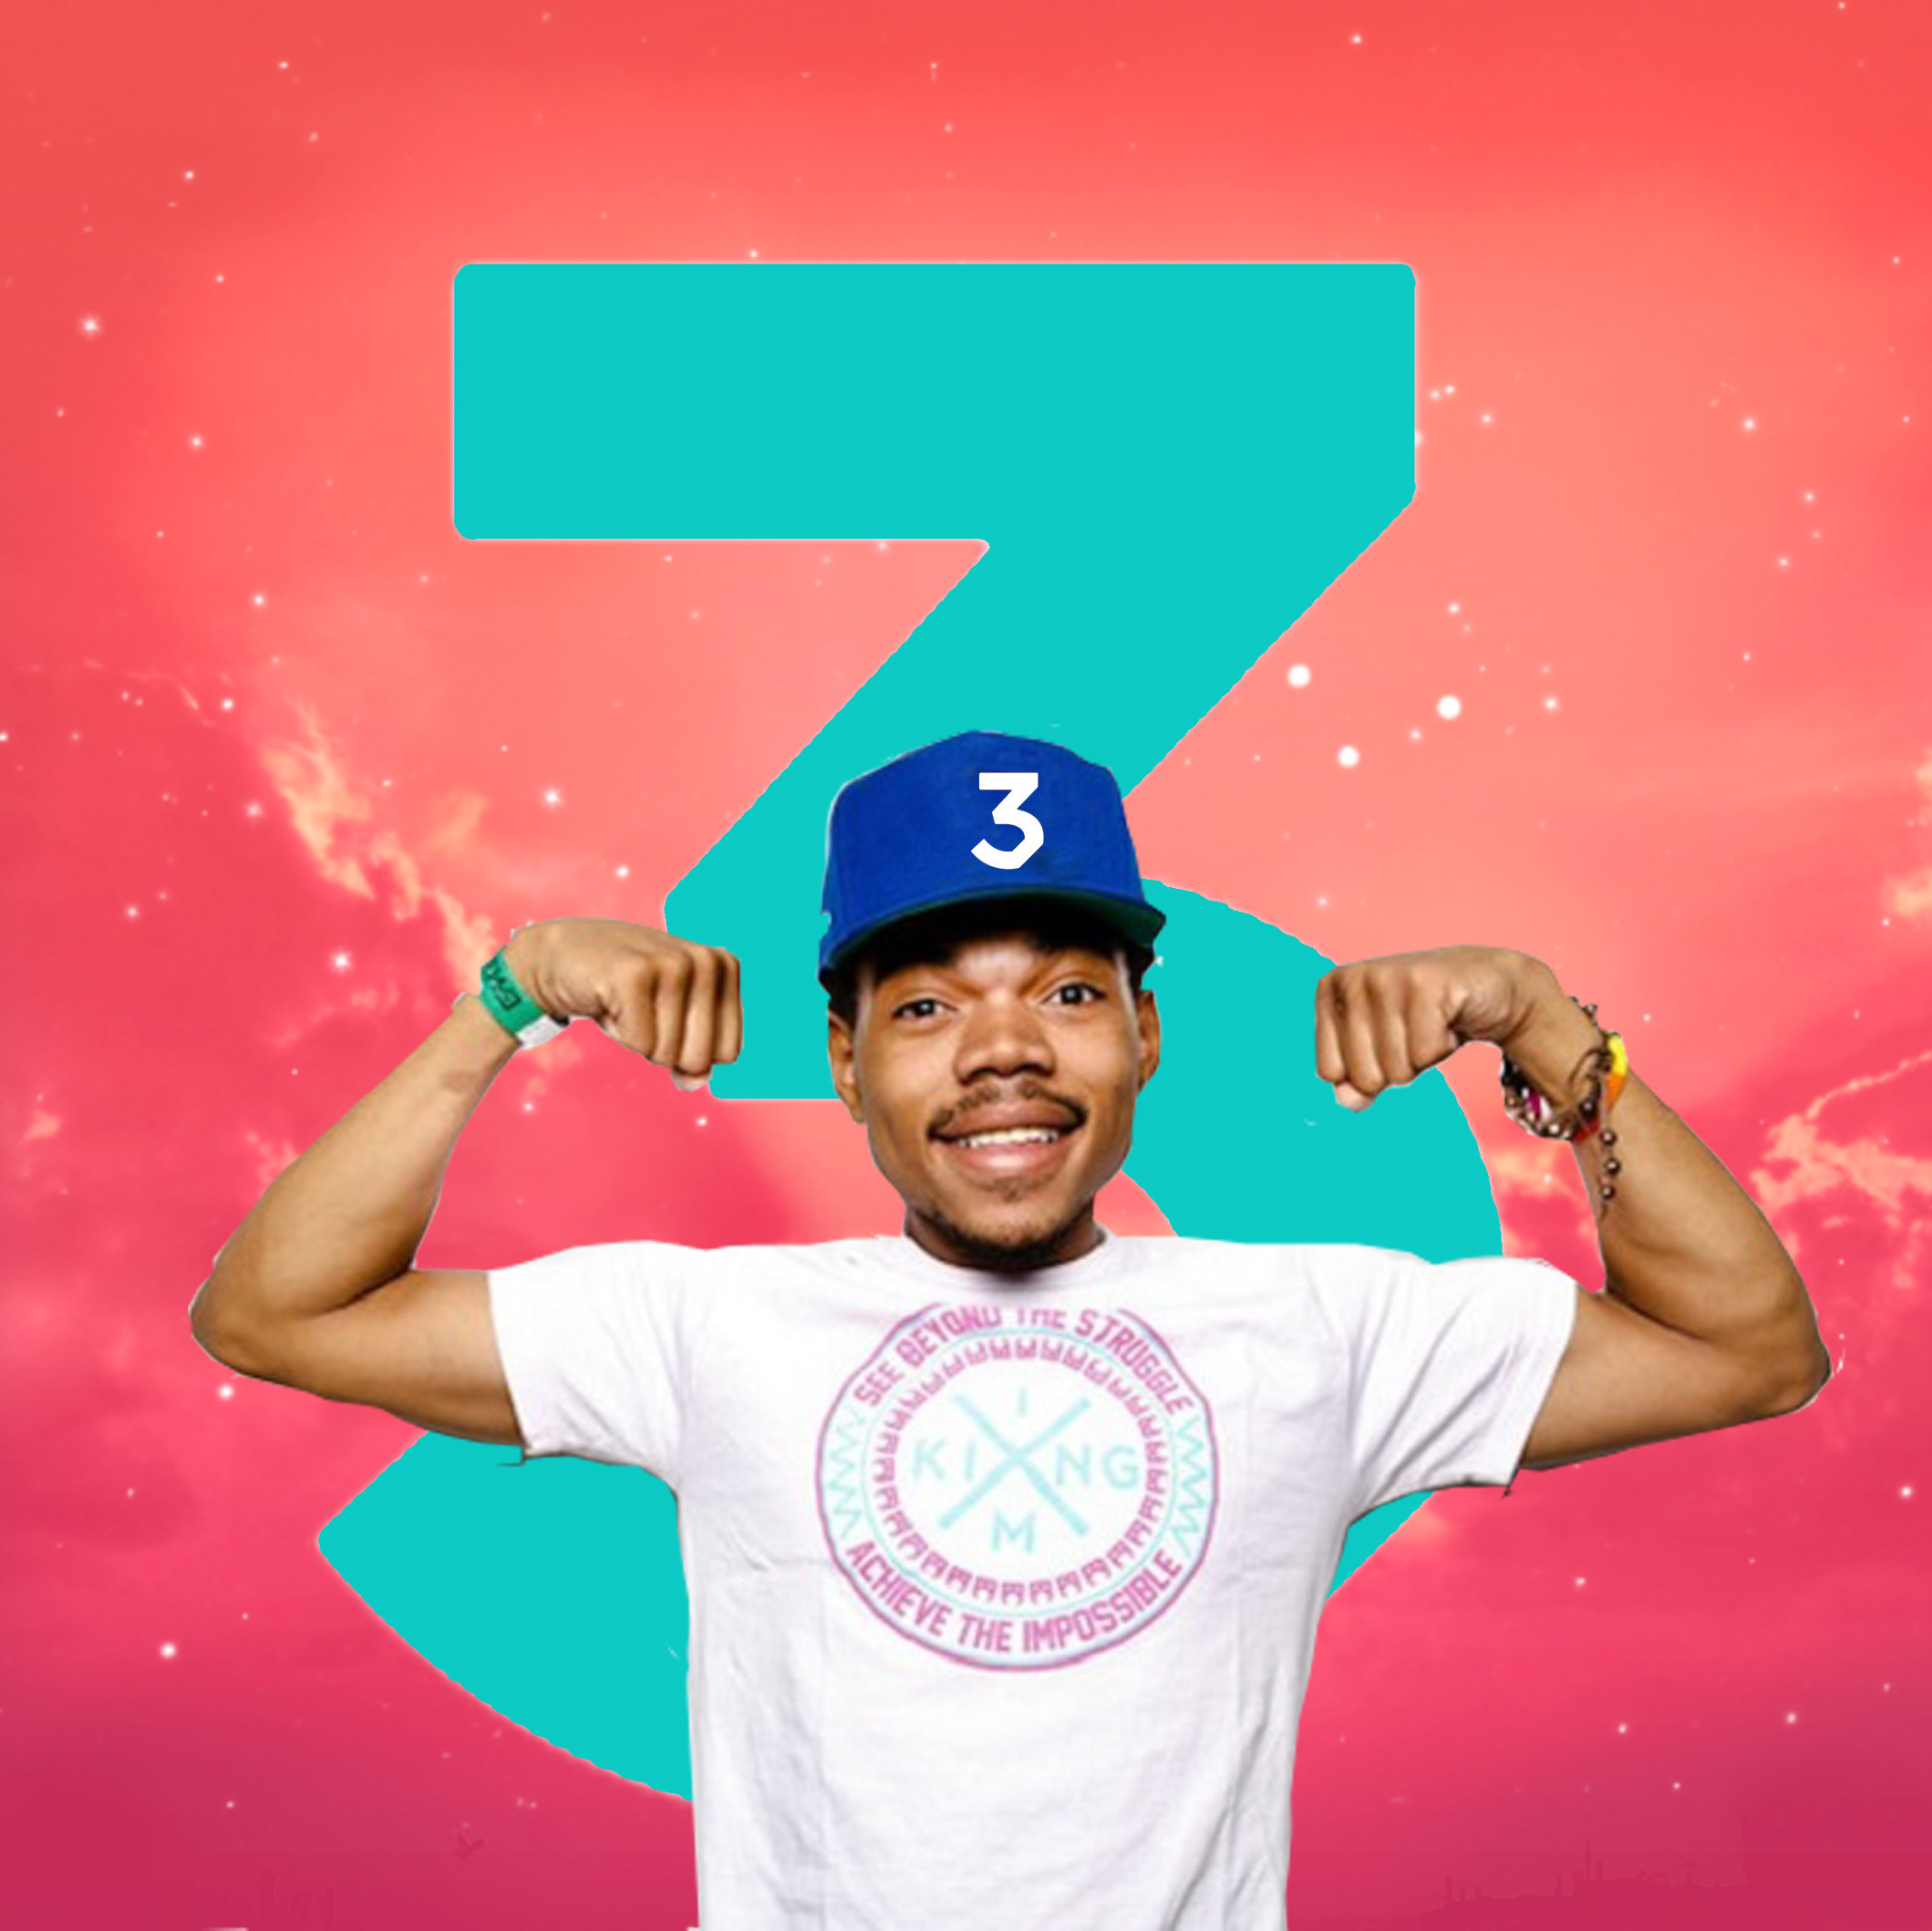 Chance The Rapper Coloring Book Wallpaper
 Chance The Rapper Wallpapers ·① WallpaperTag